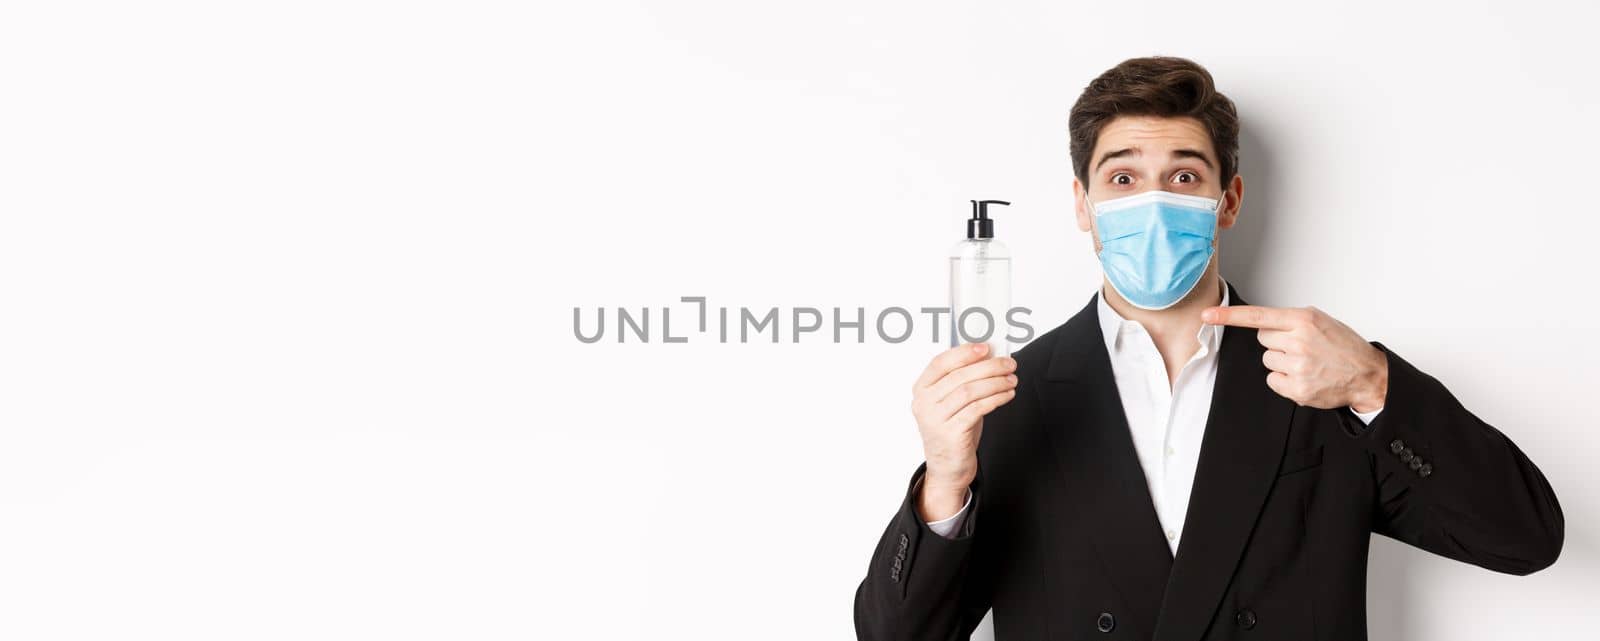 Concept of covid-19, business and social distancing. Close-up of handsome man in trendy suit and medical mask, recommending hand sanitizer, standing against white background.